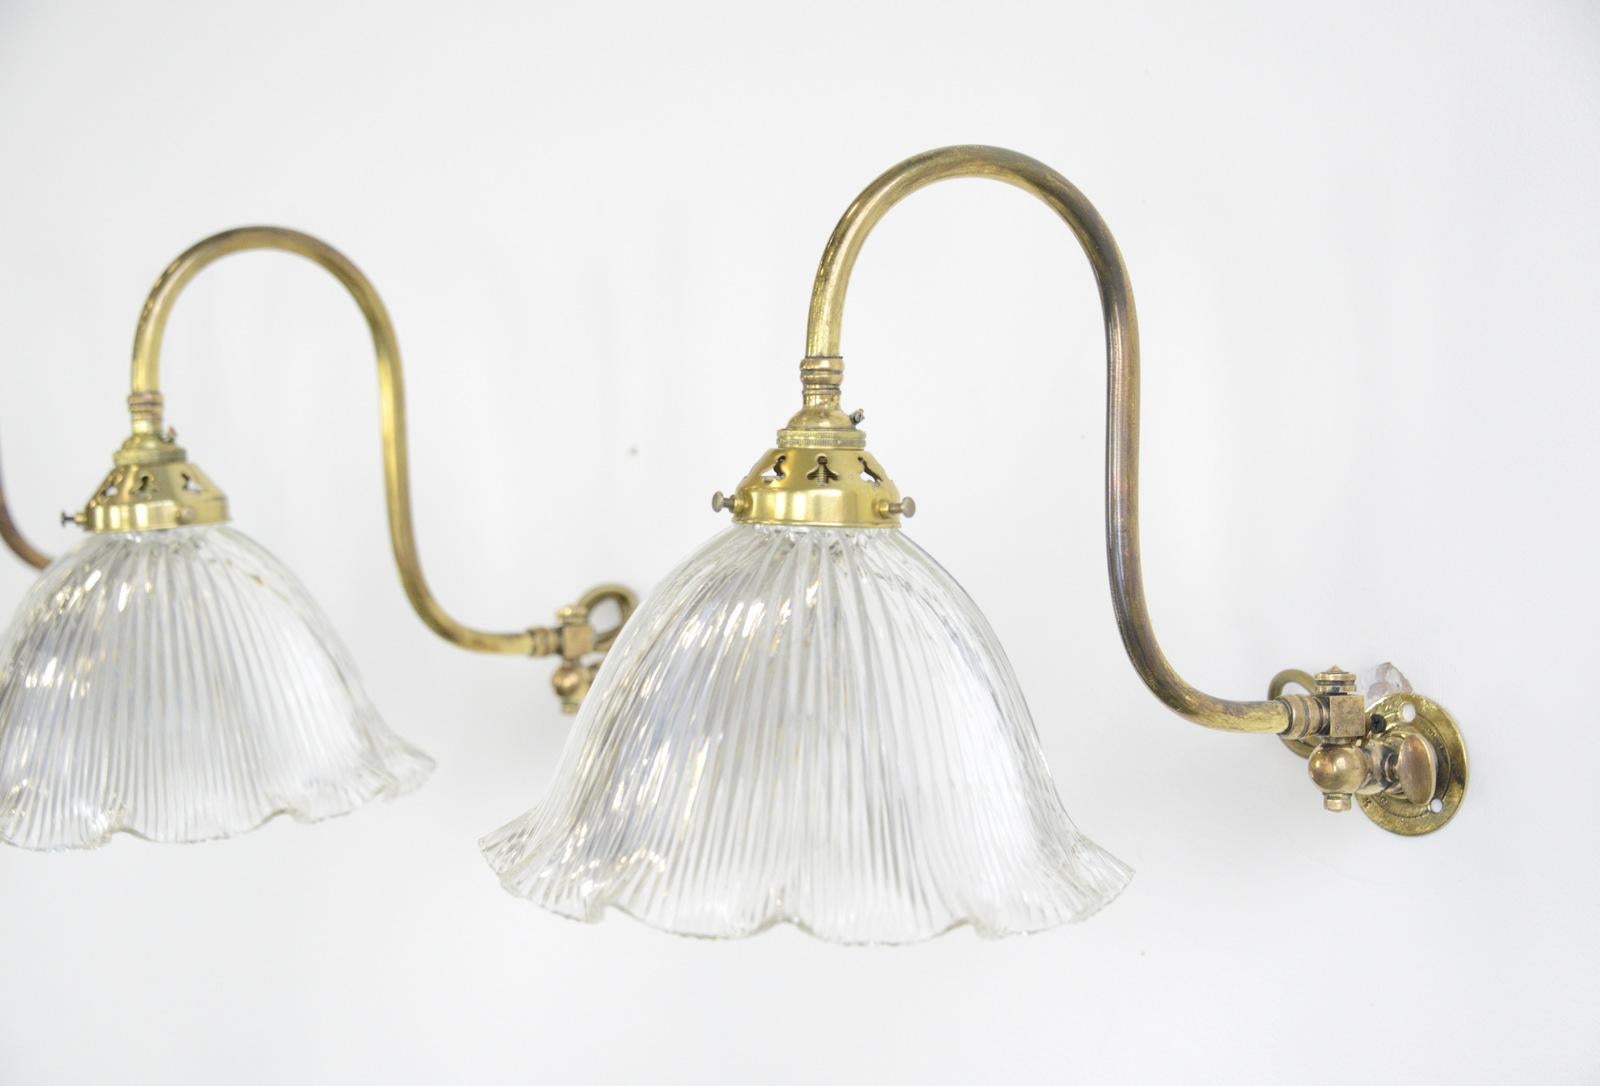 Art Nouveau Articulated Wall Sconces by Holophane, circa 1910